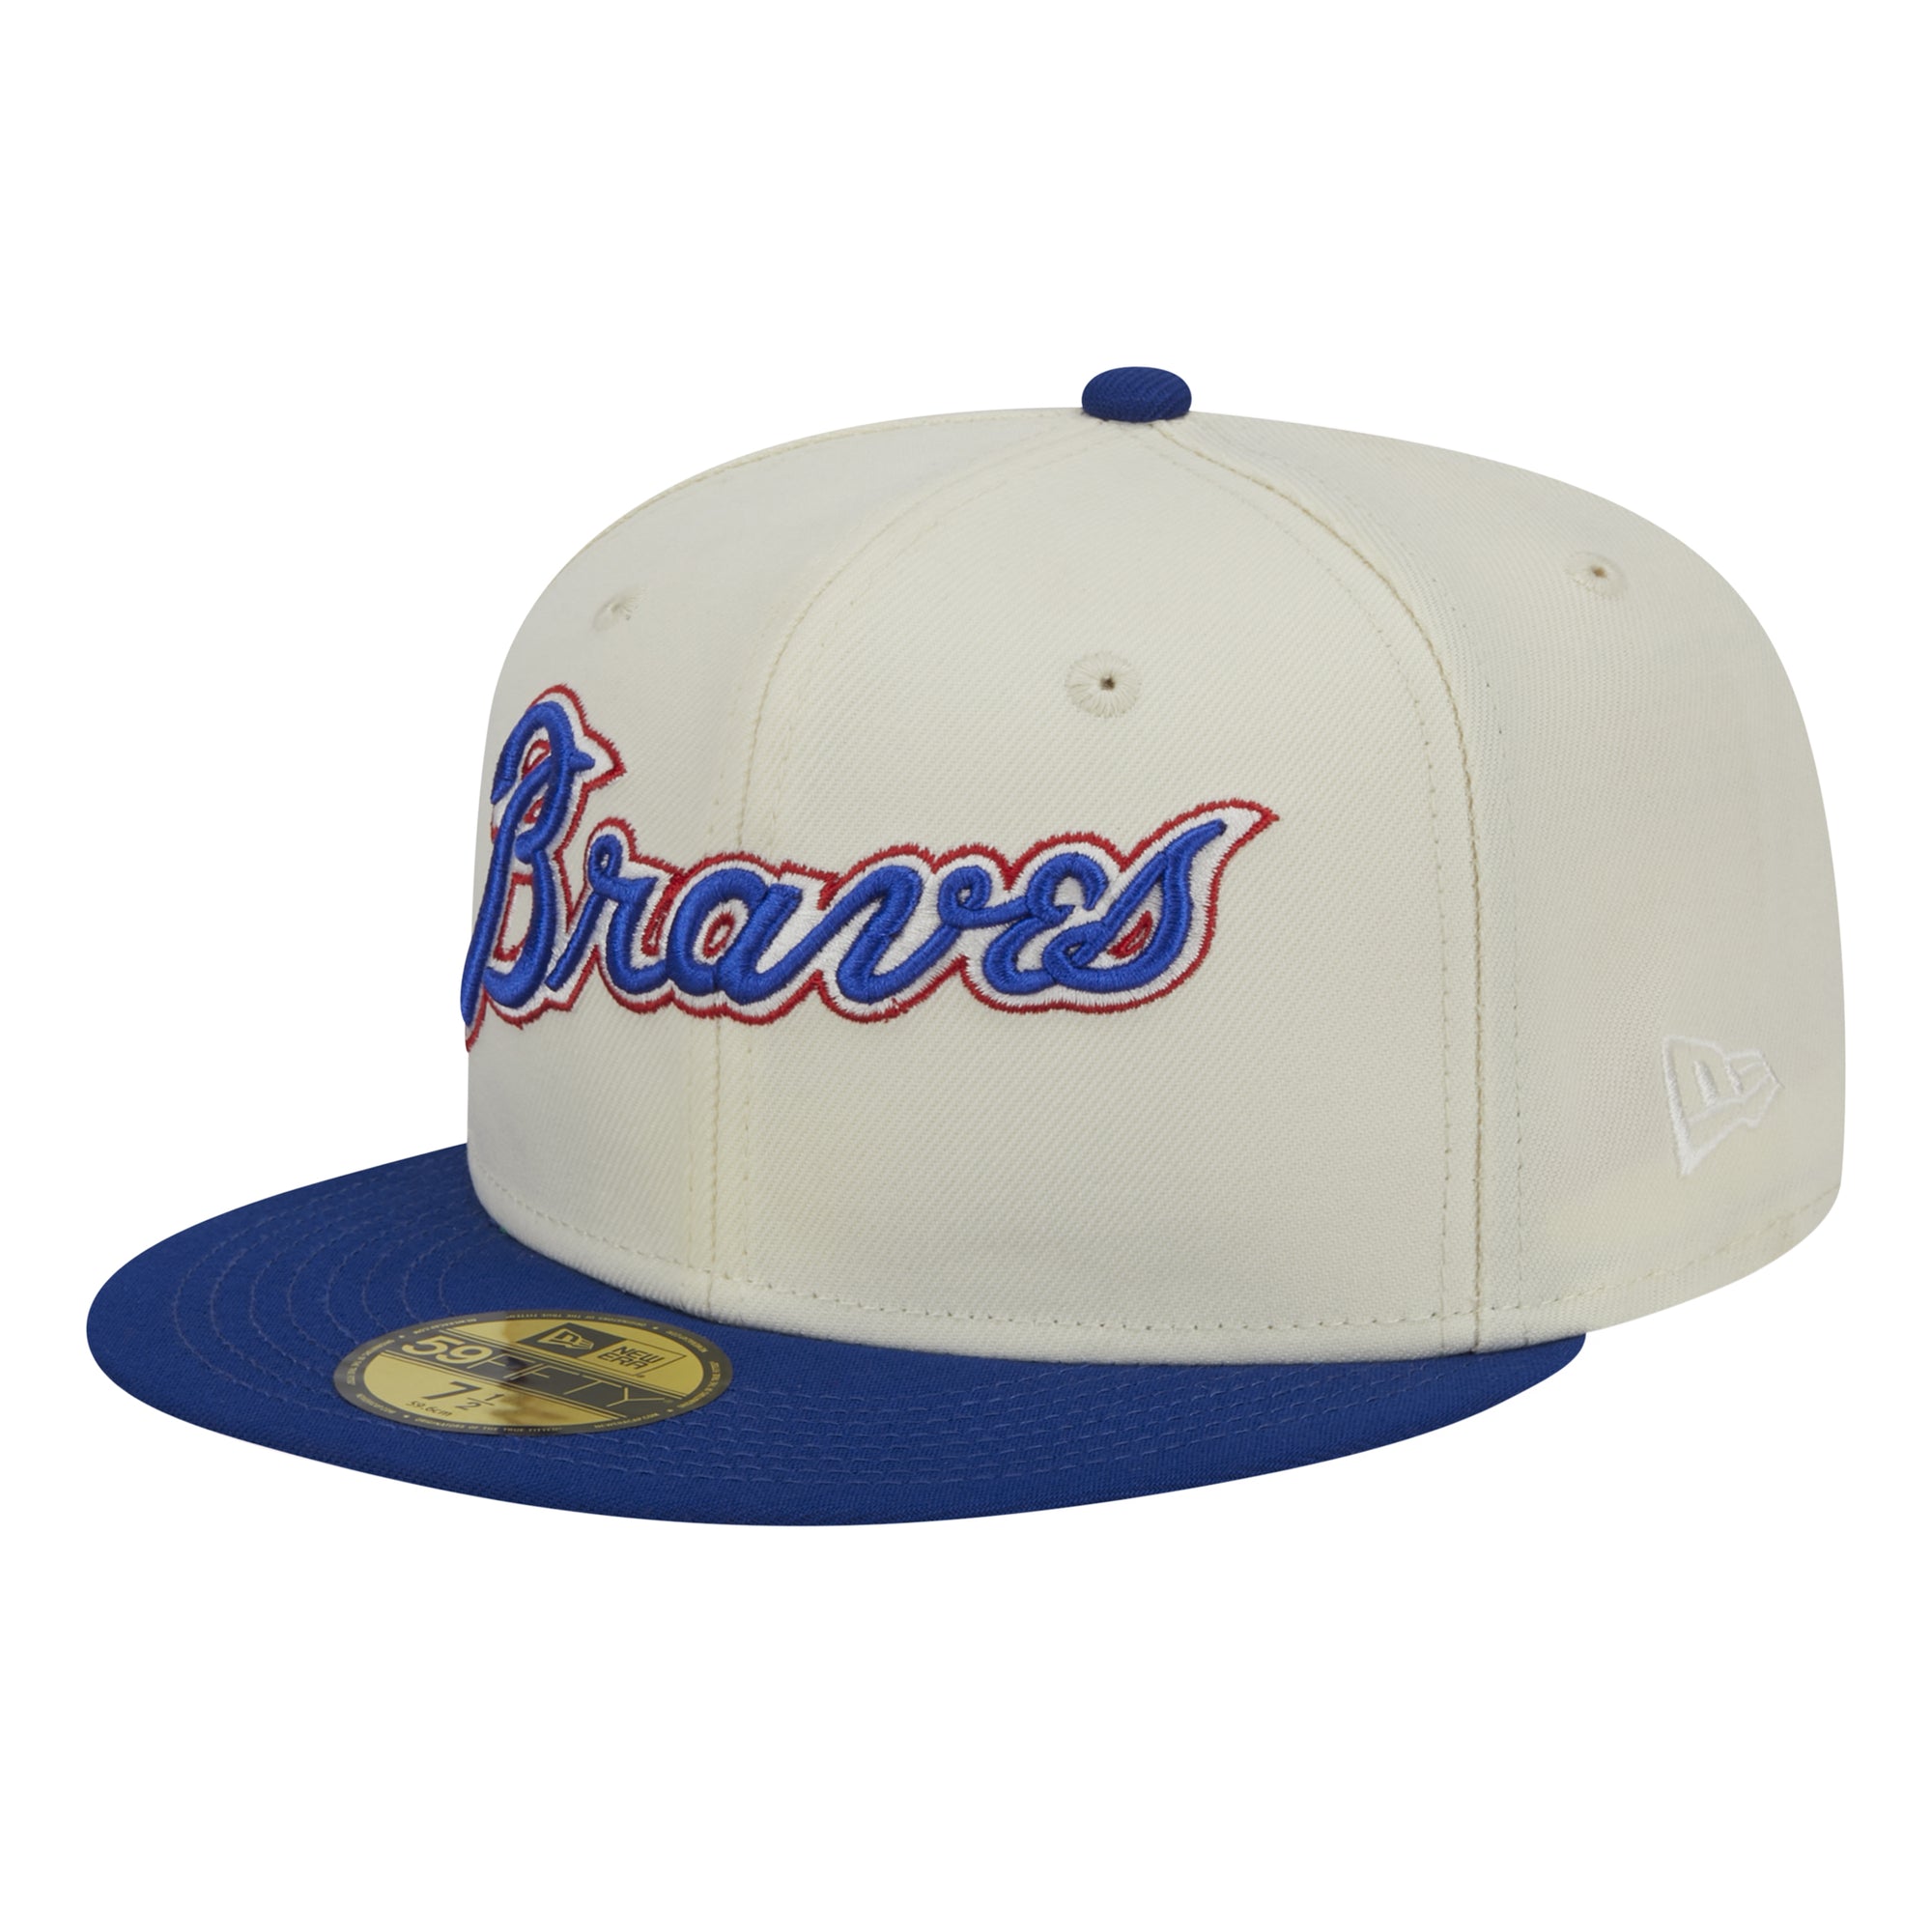 Men's New Era Atlanta Braves Cooperstown Collection Retro 59FIFTY Fitted Cap